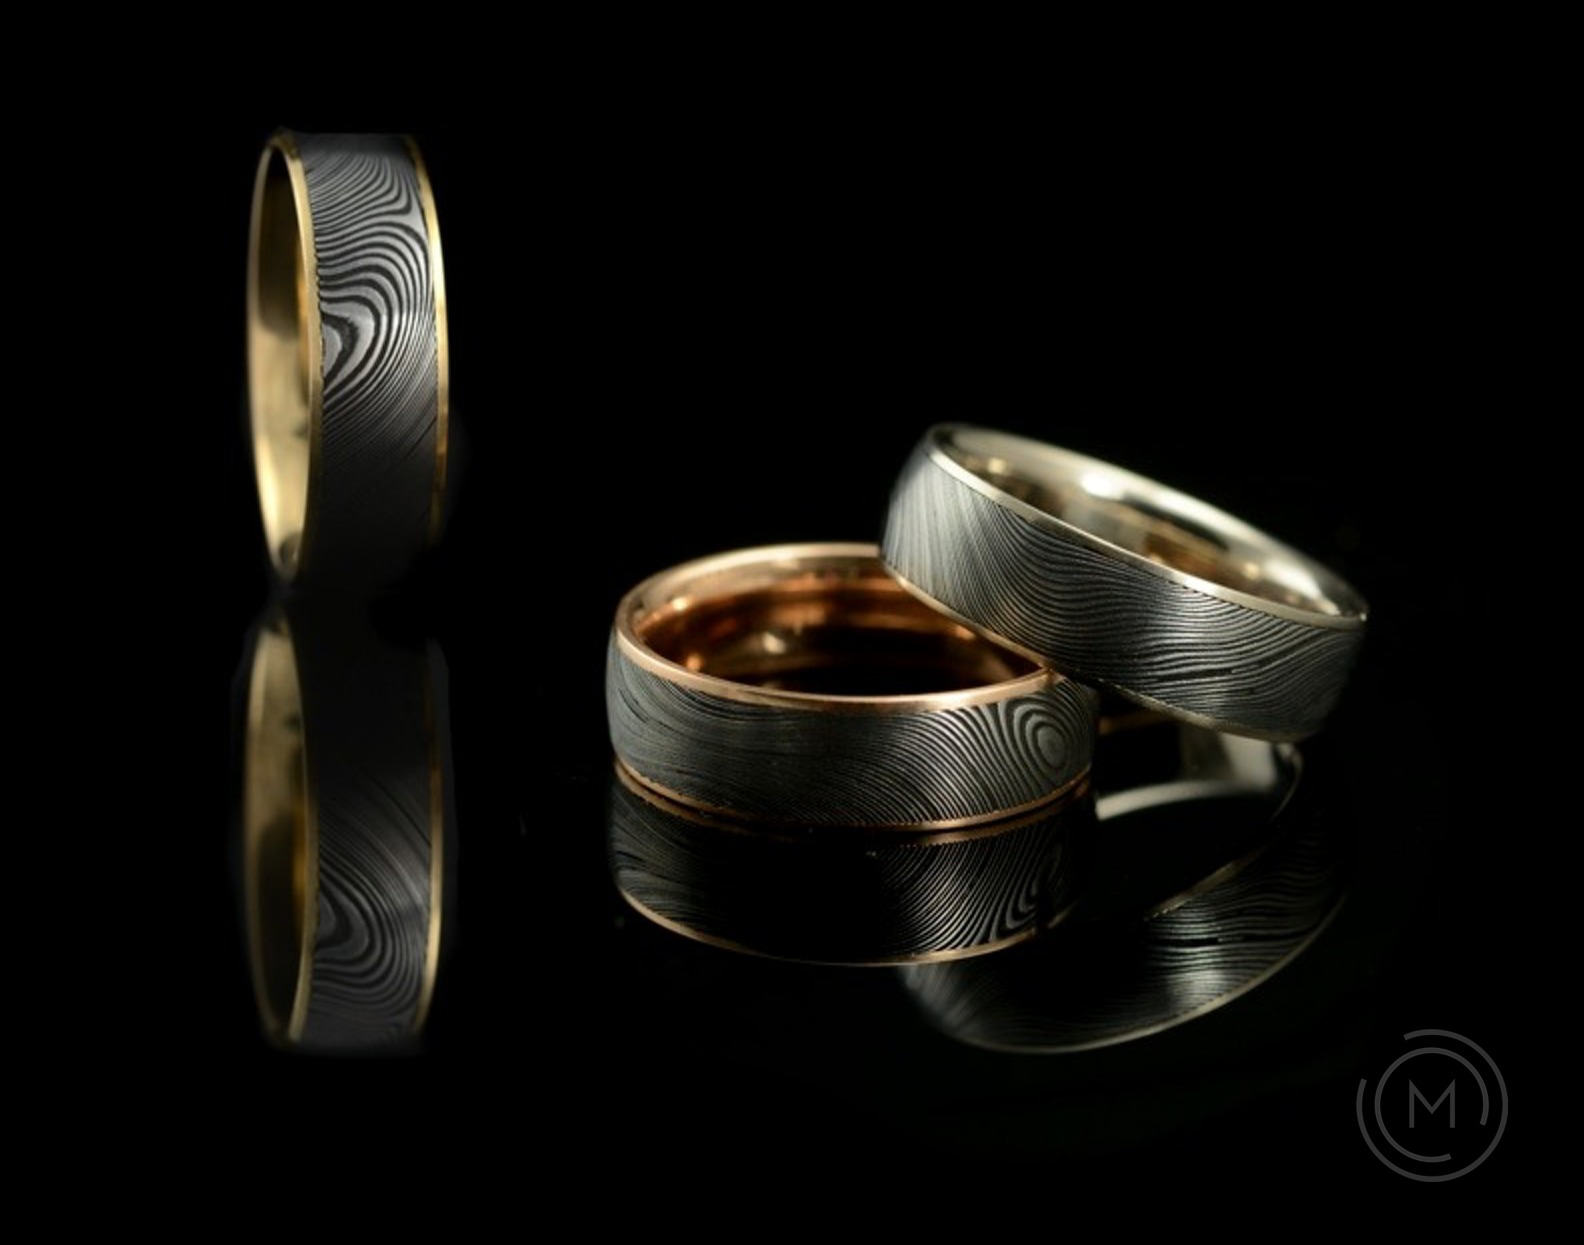 Damascus steel and gold mens wedding rings